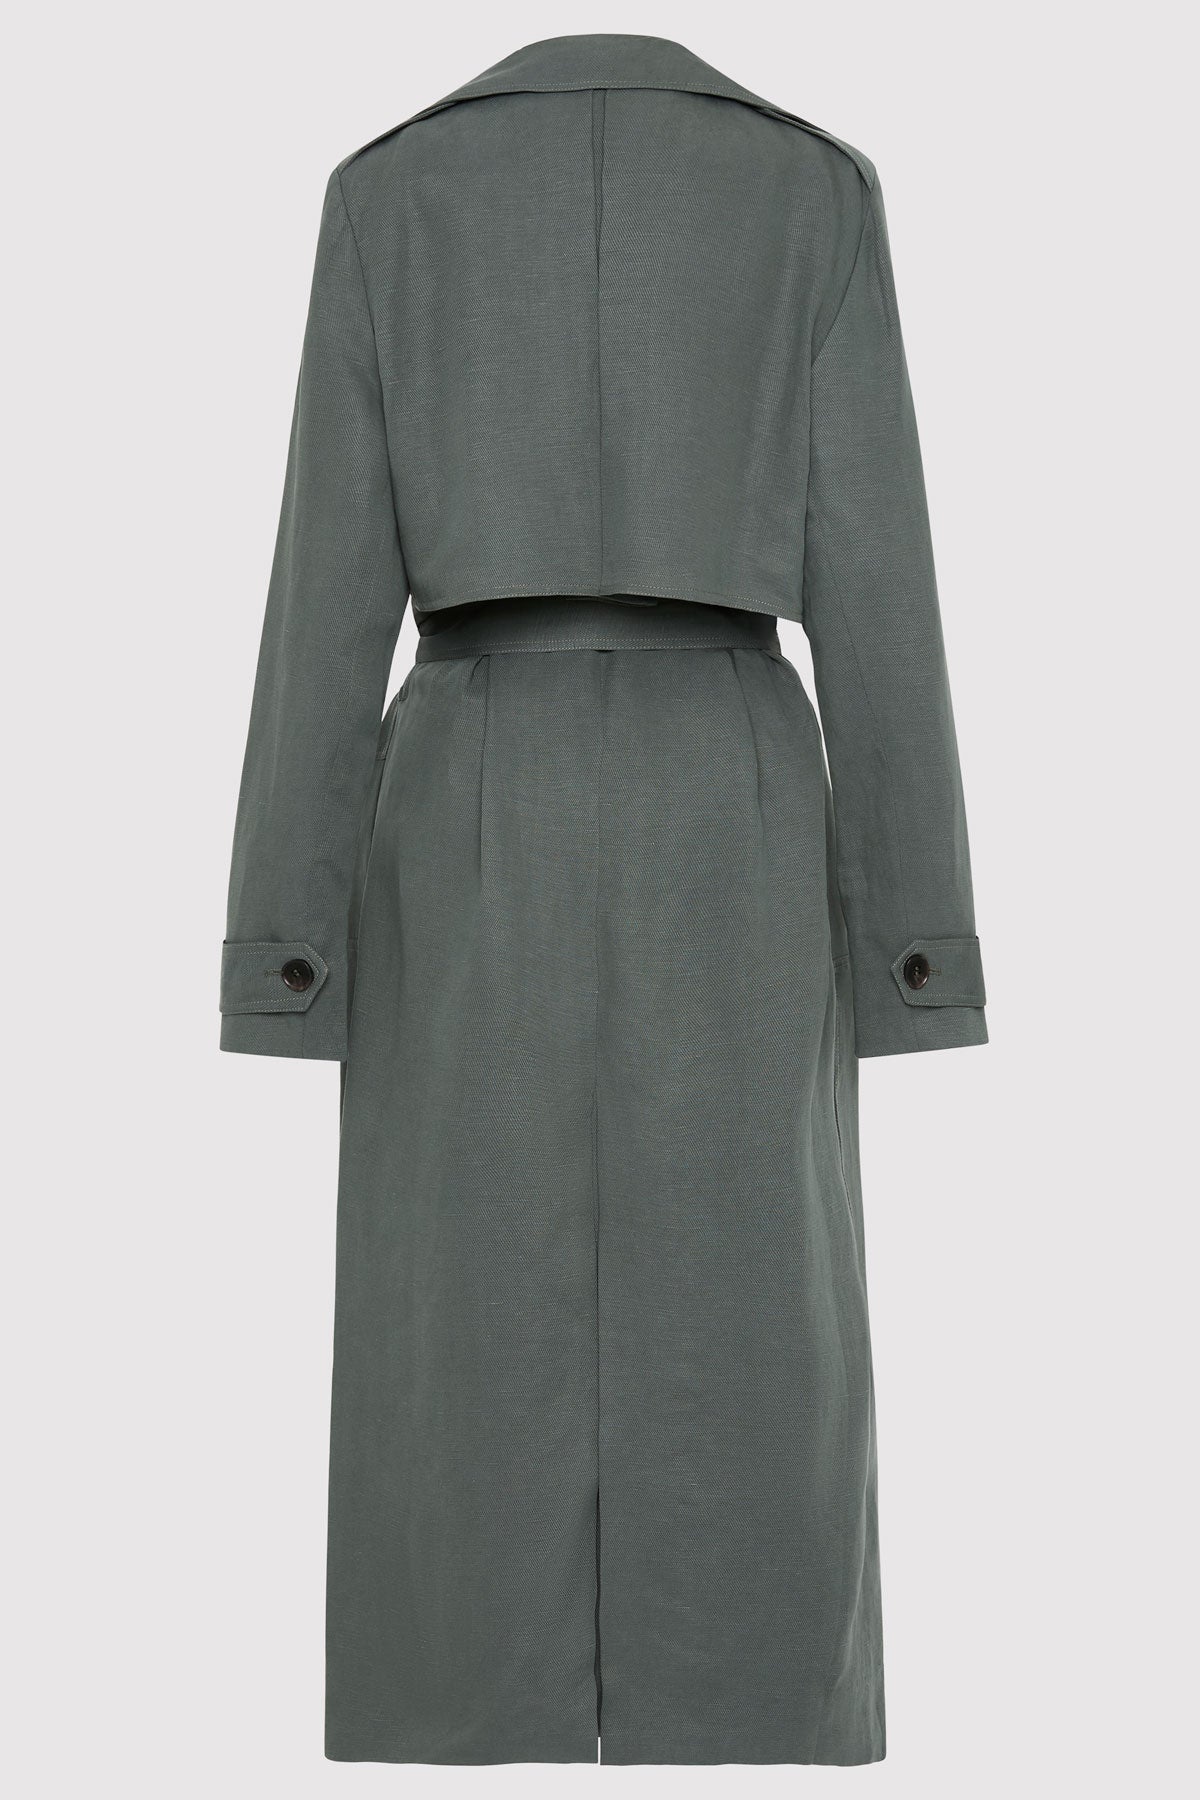 Soft Tailored Trench - Balsam Green